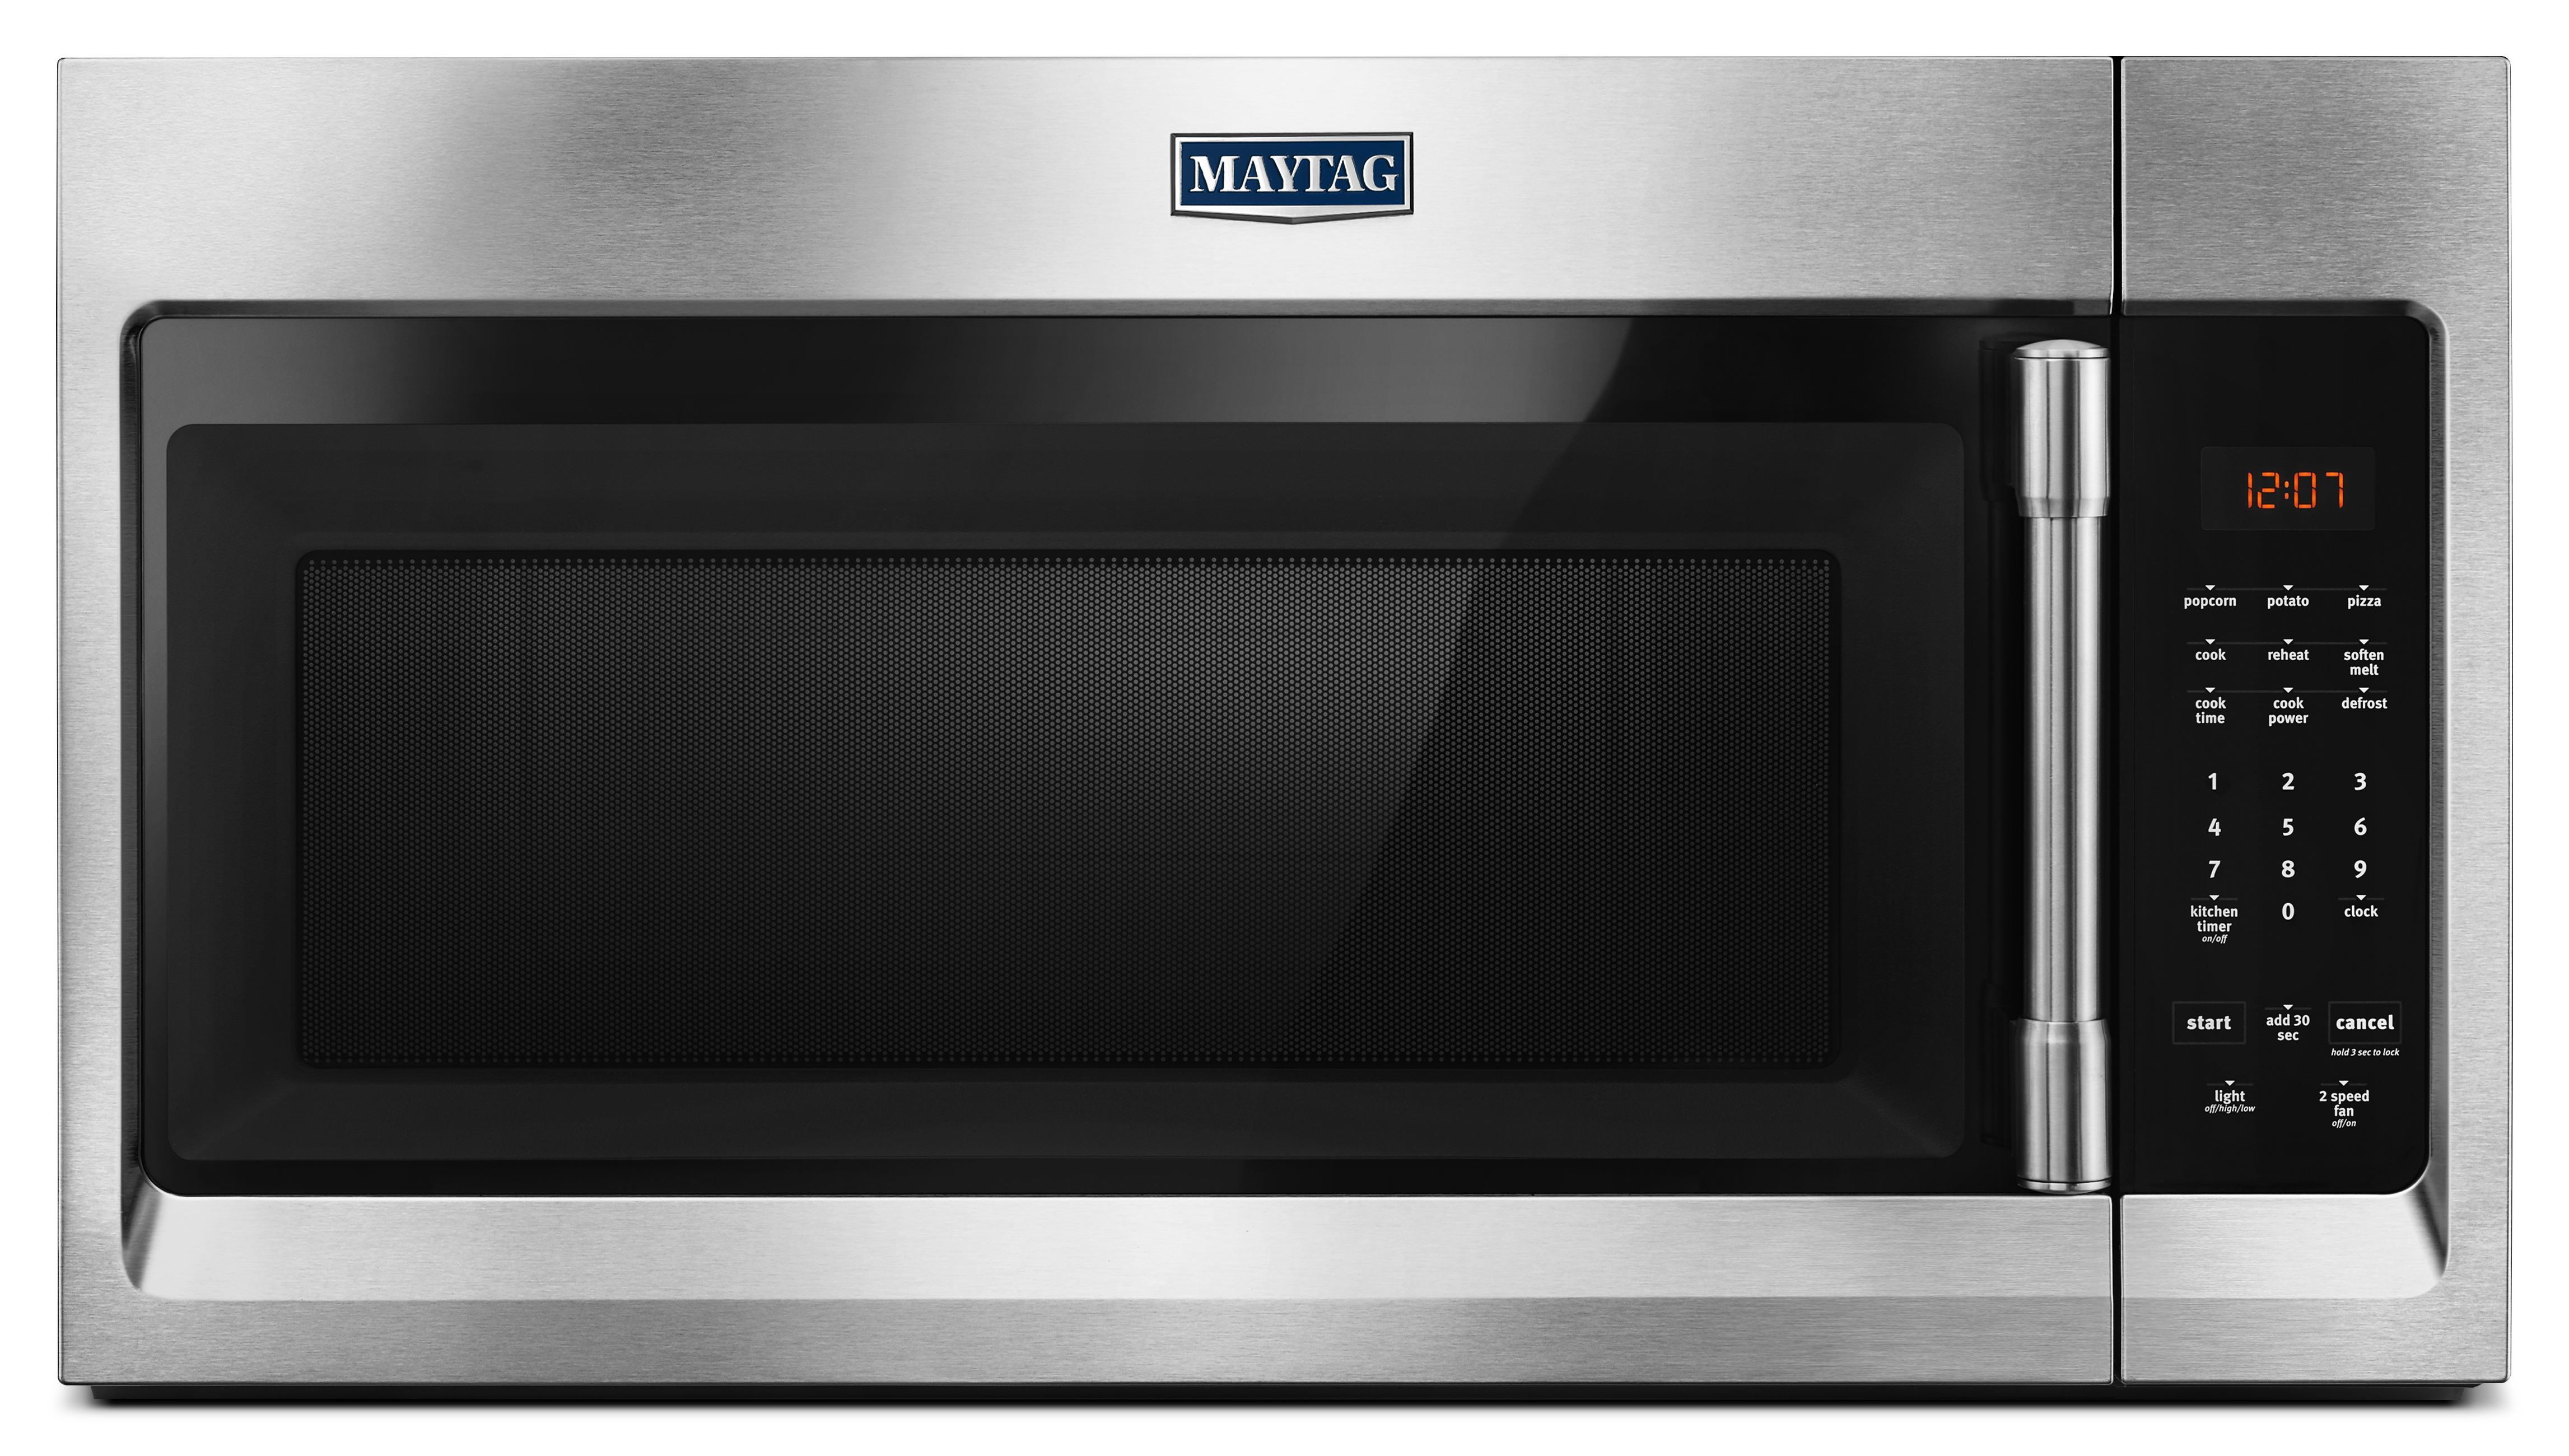 Maytag MMV1174FZ 1.7 cu. ft. Compact Over-the-Range Microwave